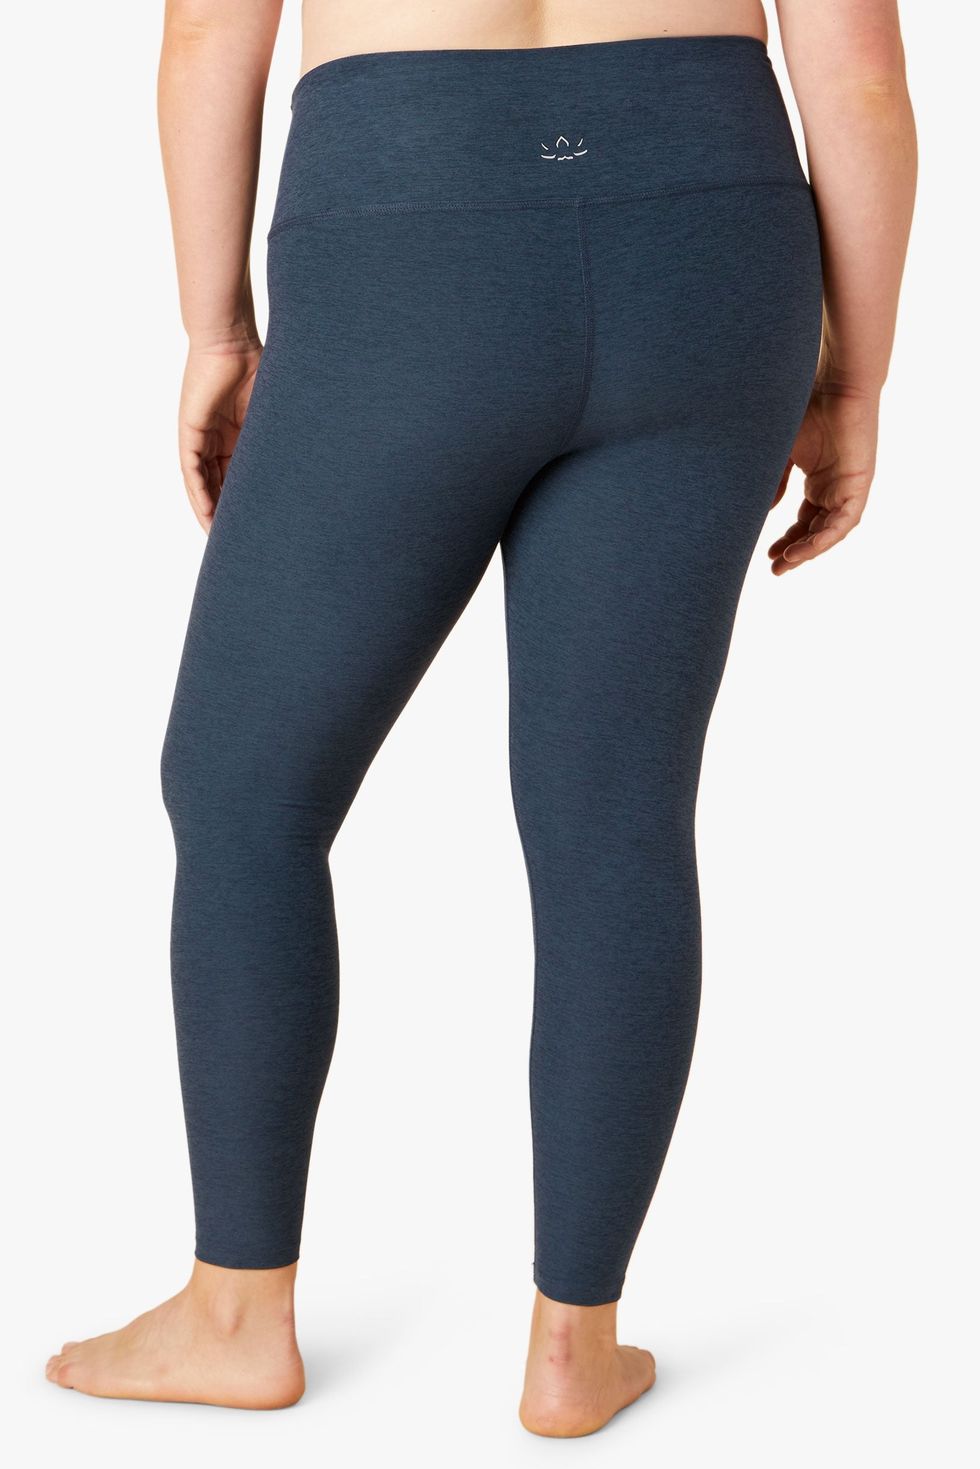 The Advantages of Butt-Lifting Leggings over Regular Ones - Its